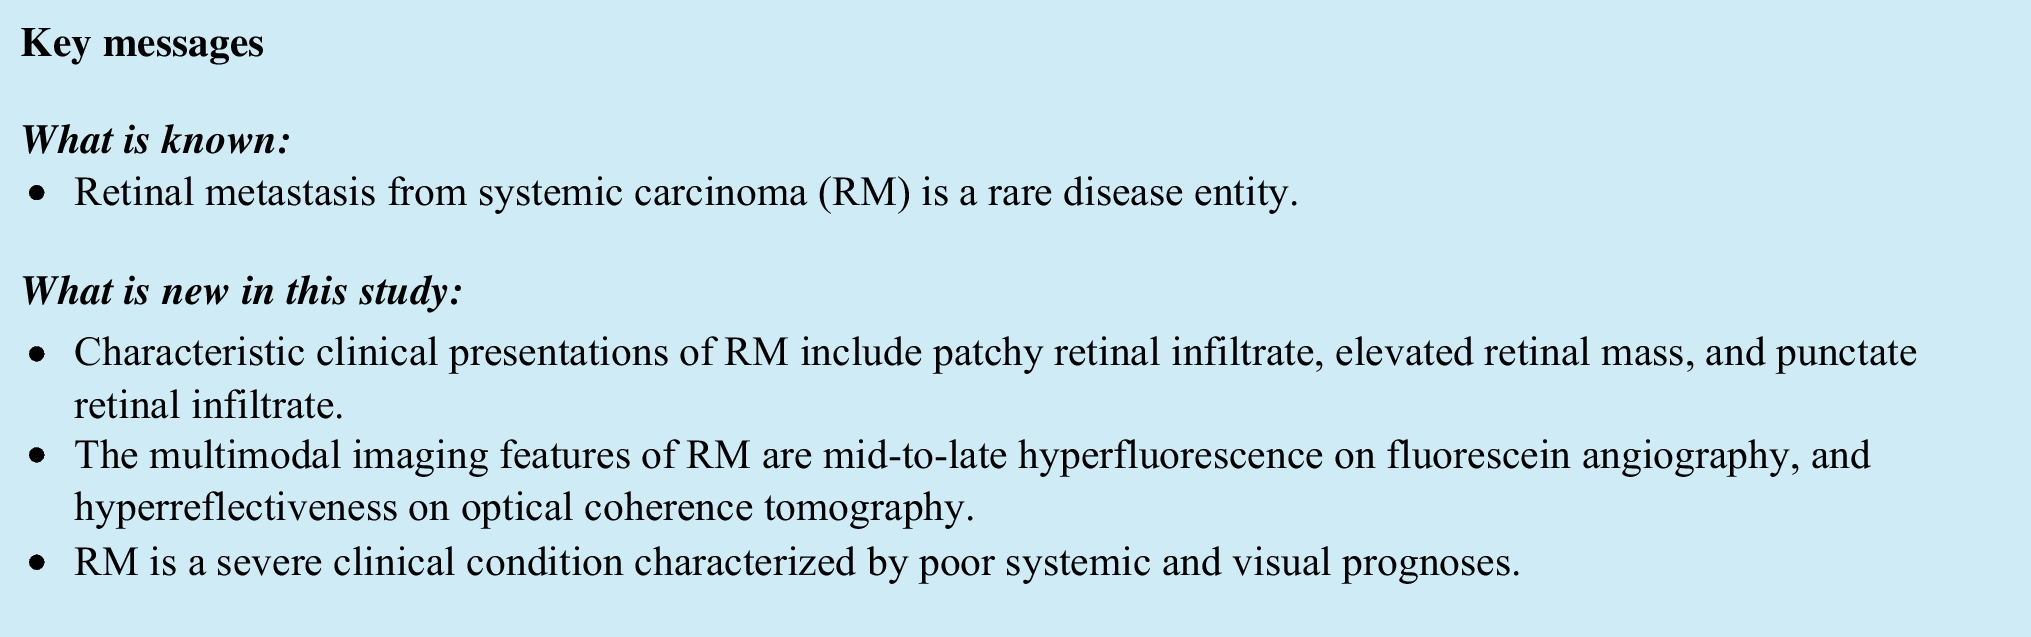 Retinal metastasis from systemic carcinoma: clinical, multimodal imaging, and pathological characteristics from a multicenter case series